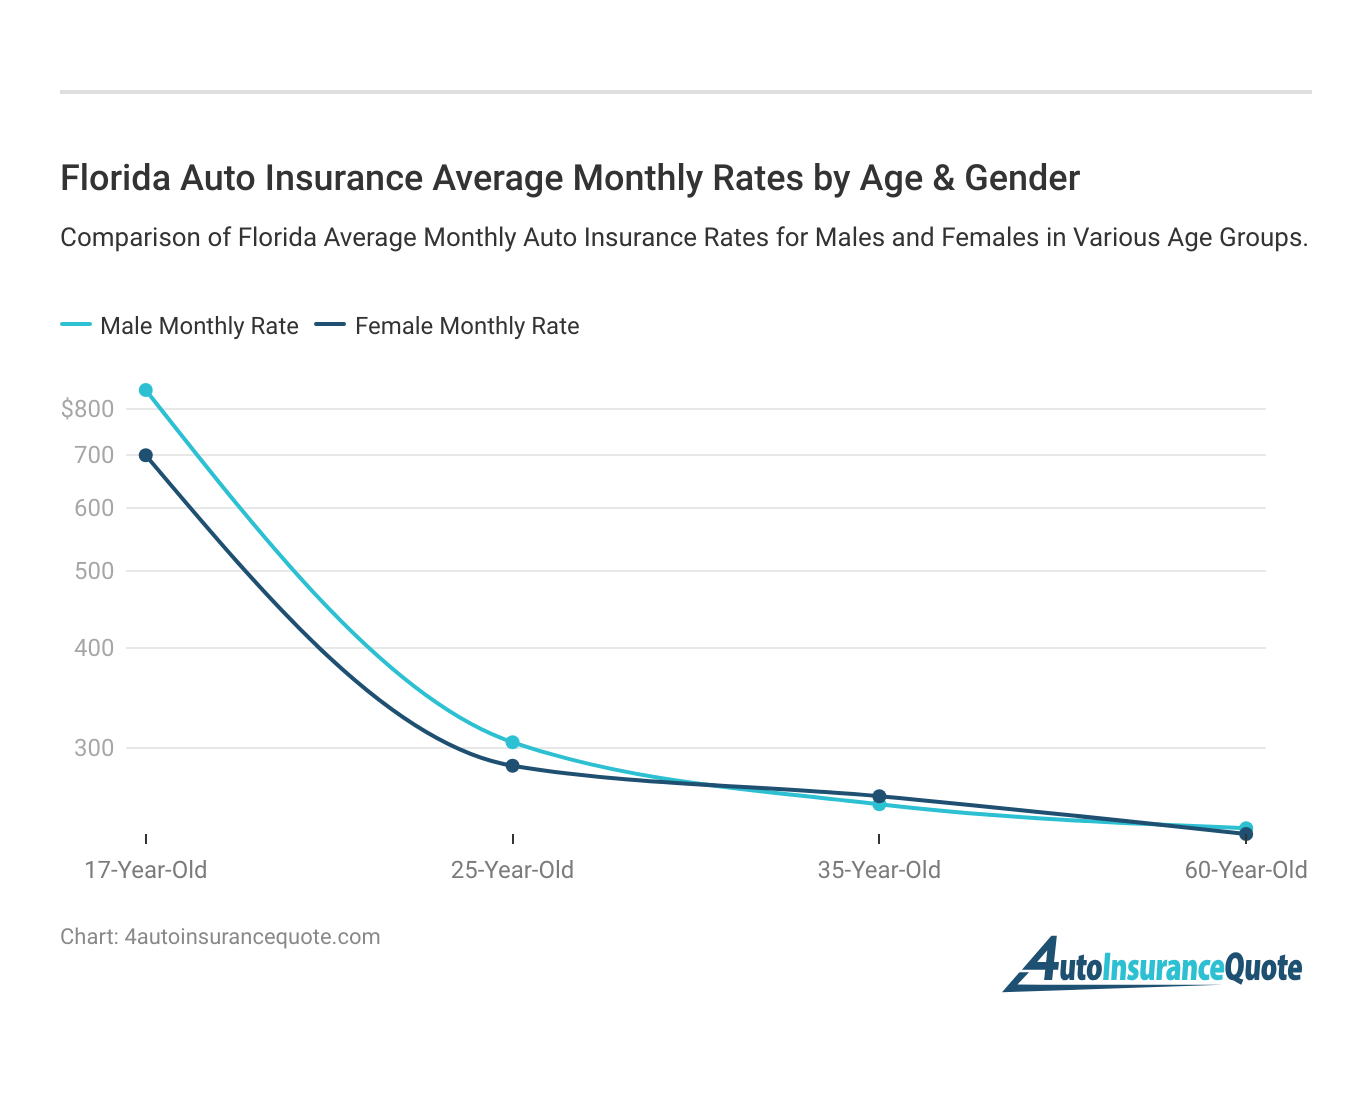 <h3>Florida Auto Insurance Average Monthly Rates by Age & Gender</h3>